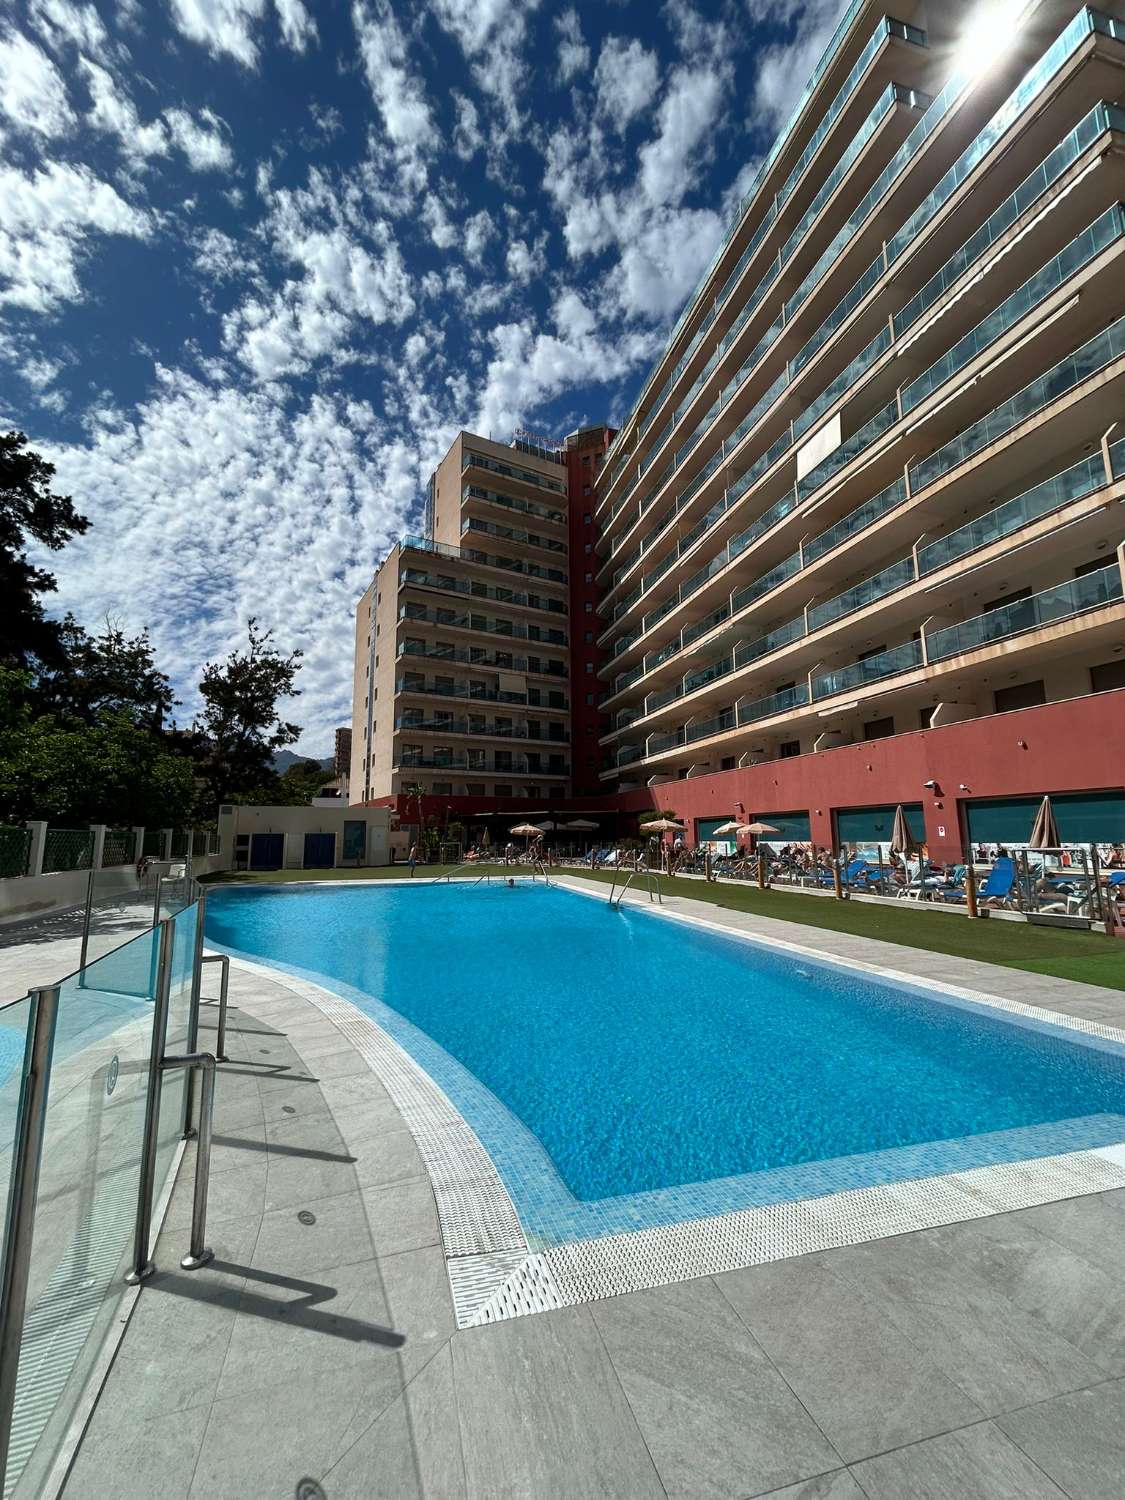 LONG SEASON. NICE APARTMENT FOR RENT 200 METERS FROM THE BEACH IN BENALMADENA